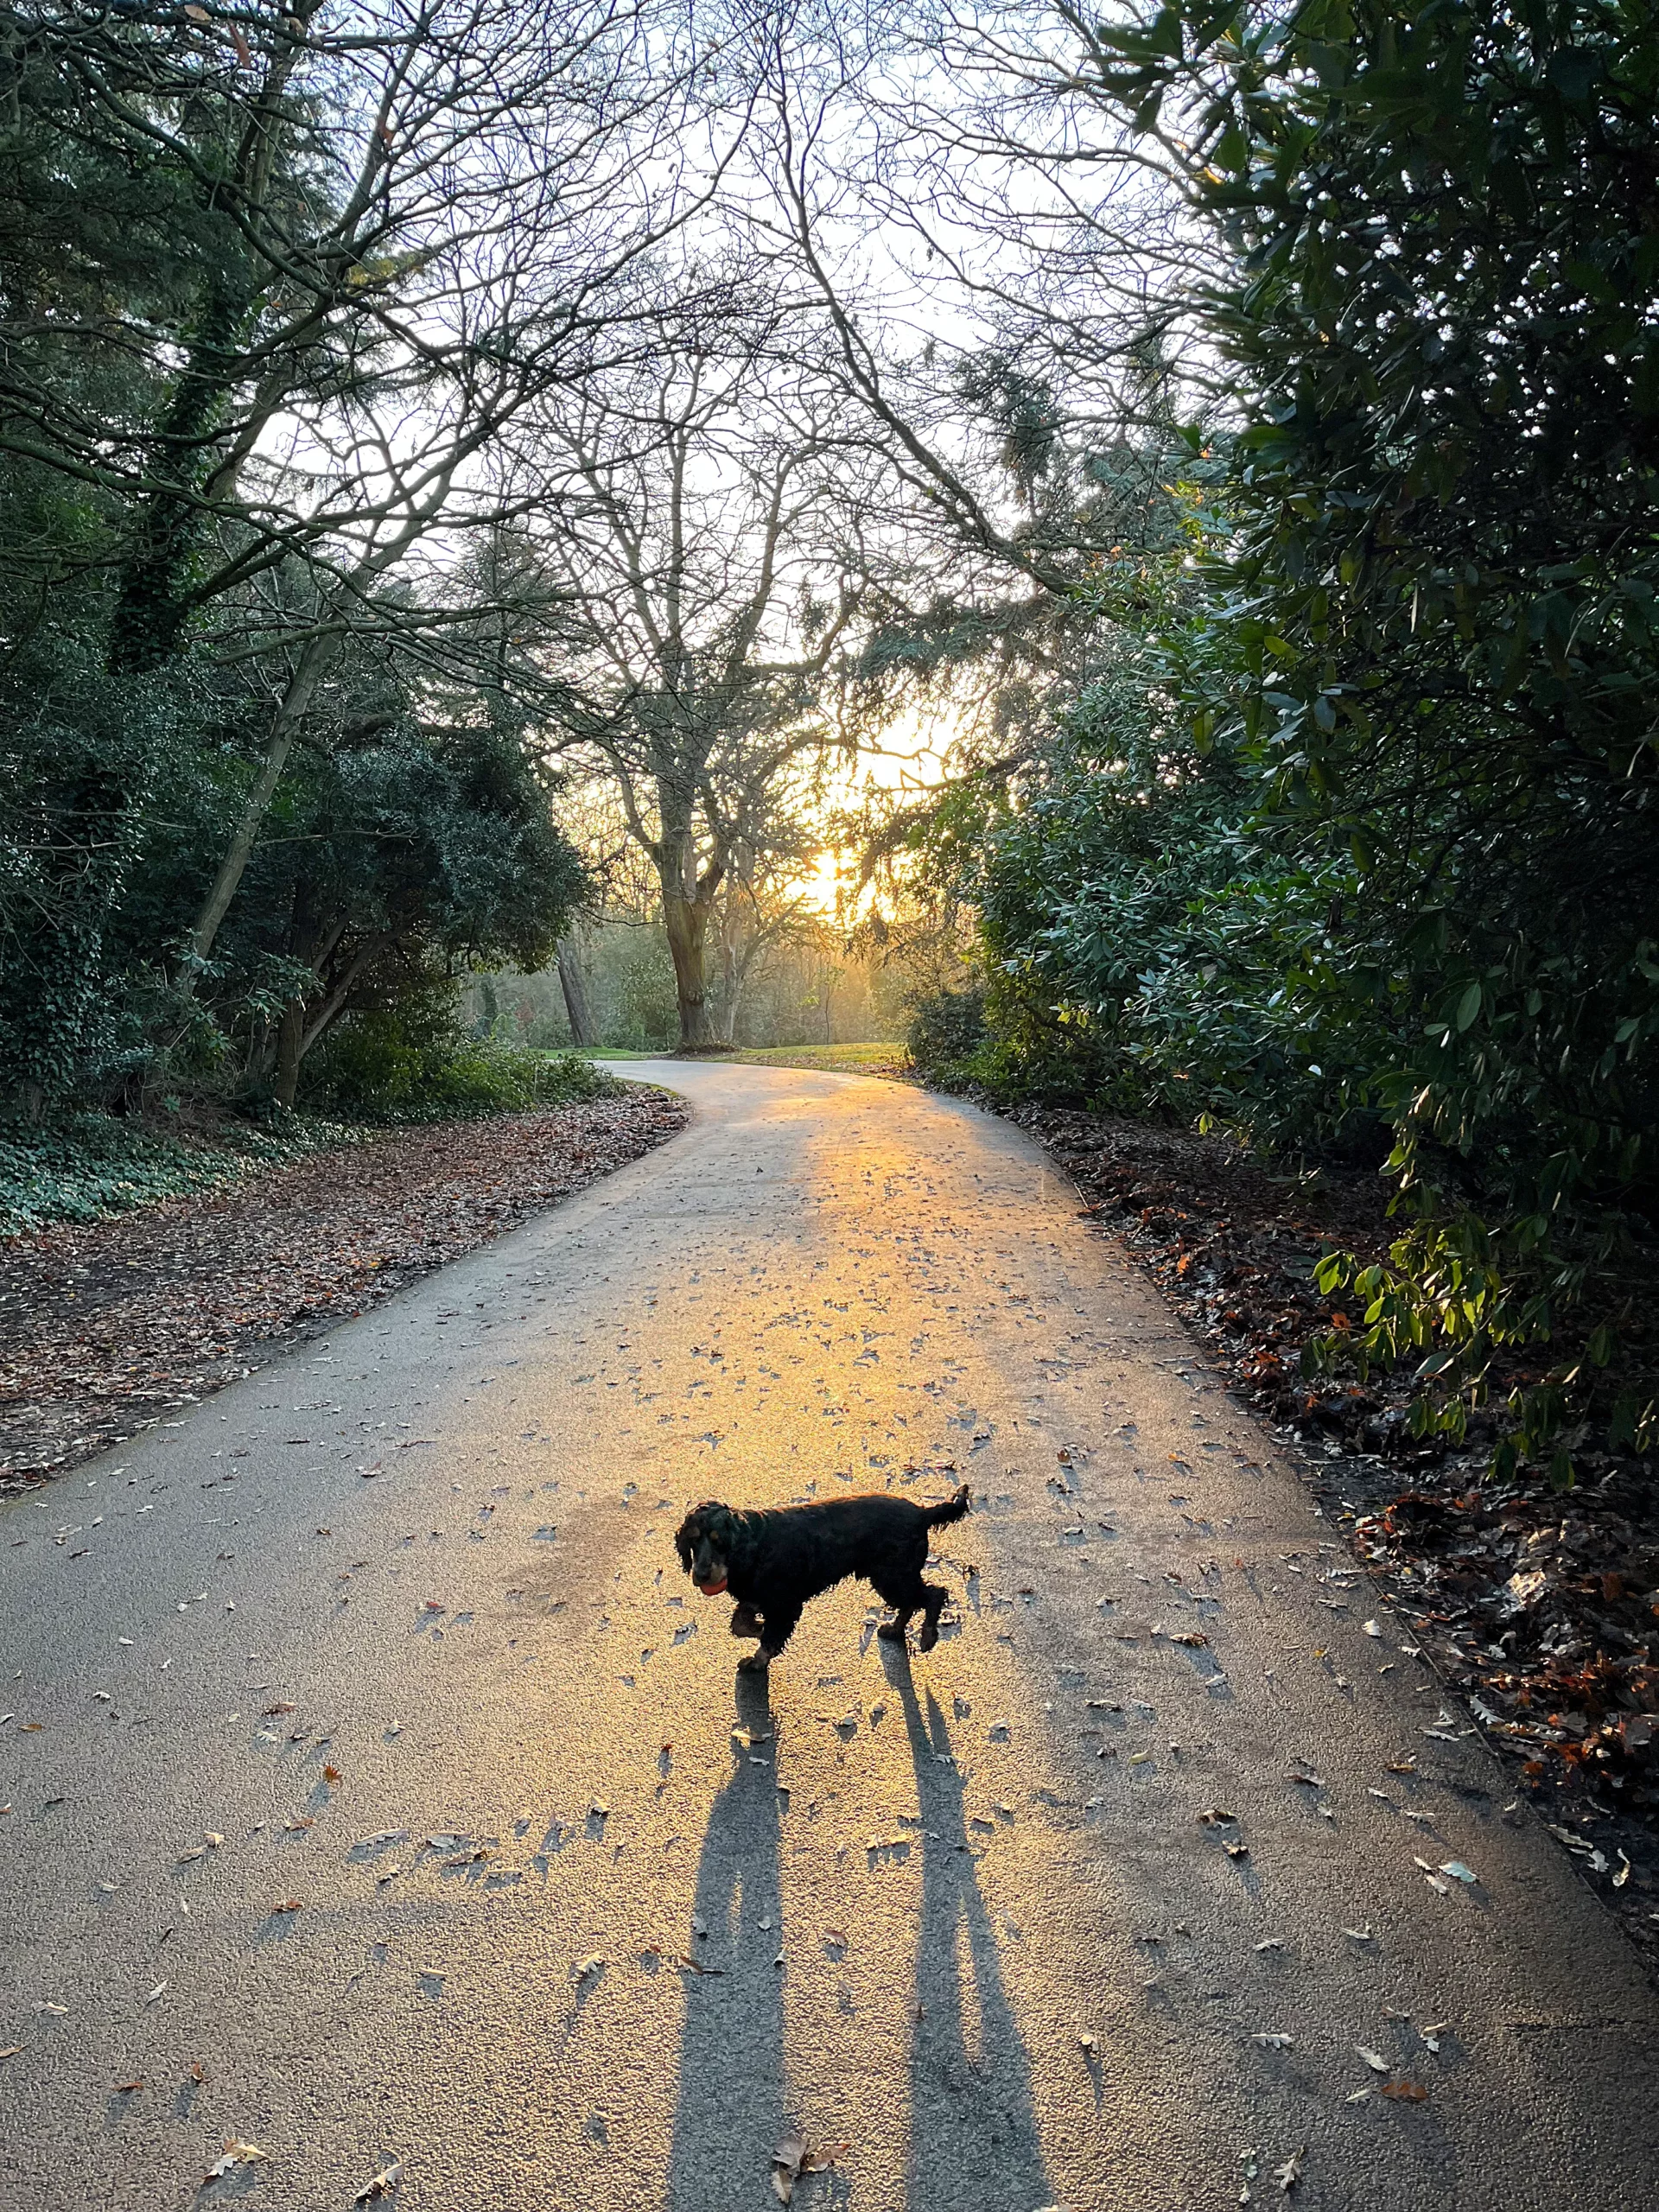 Sunrise shining on a path in winter with dog in the middle